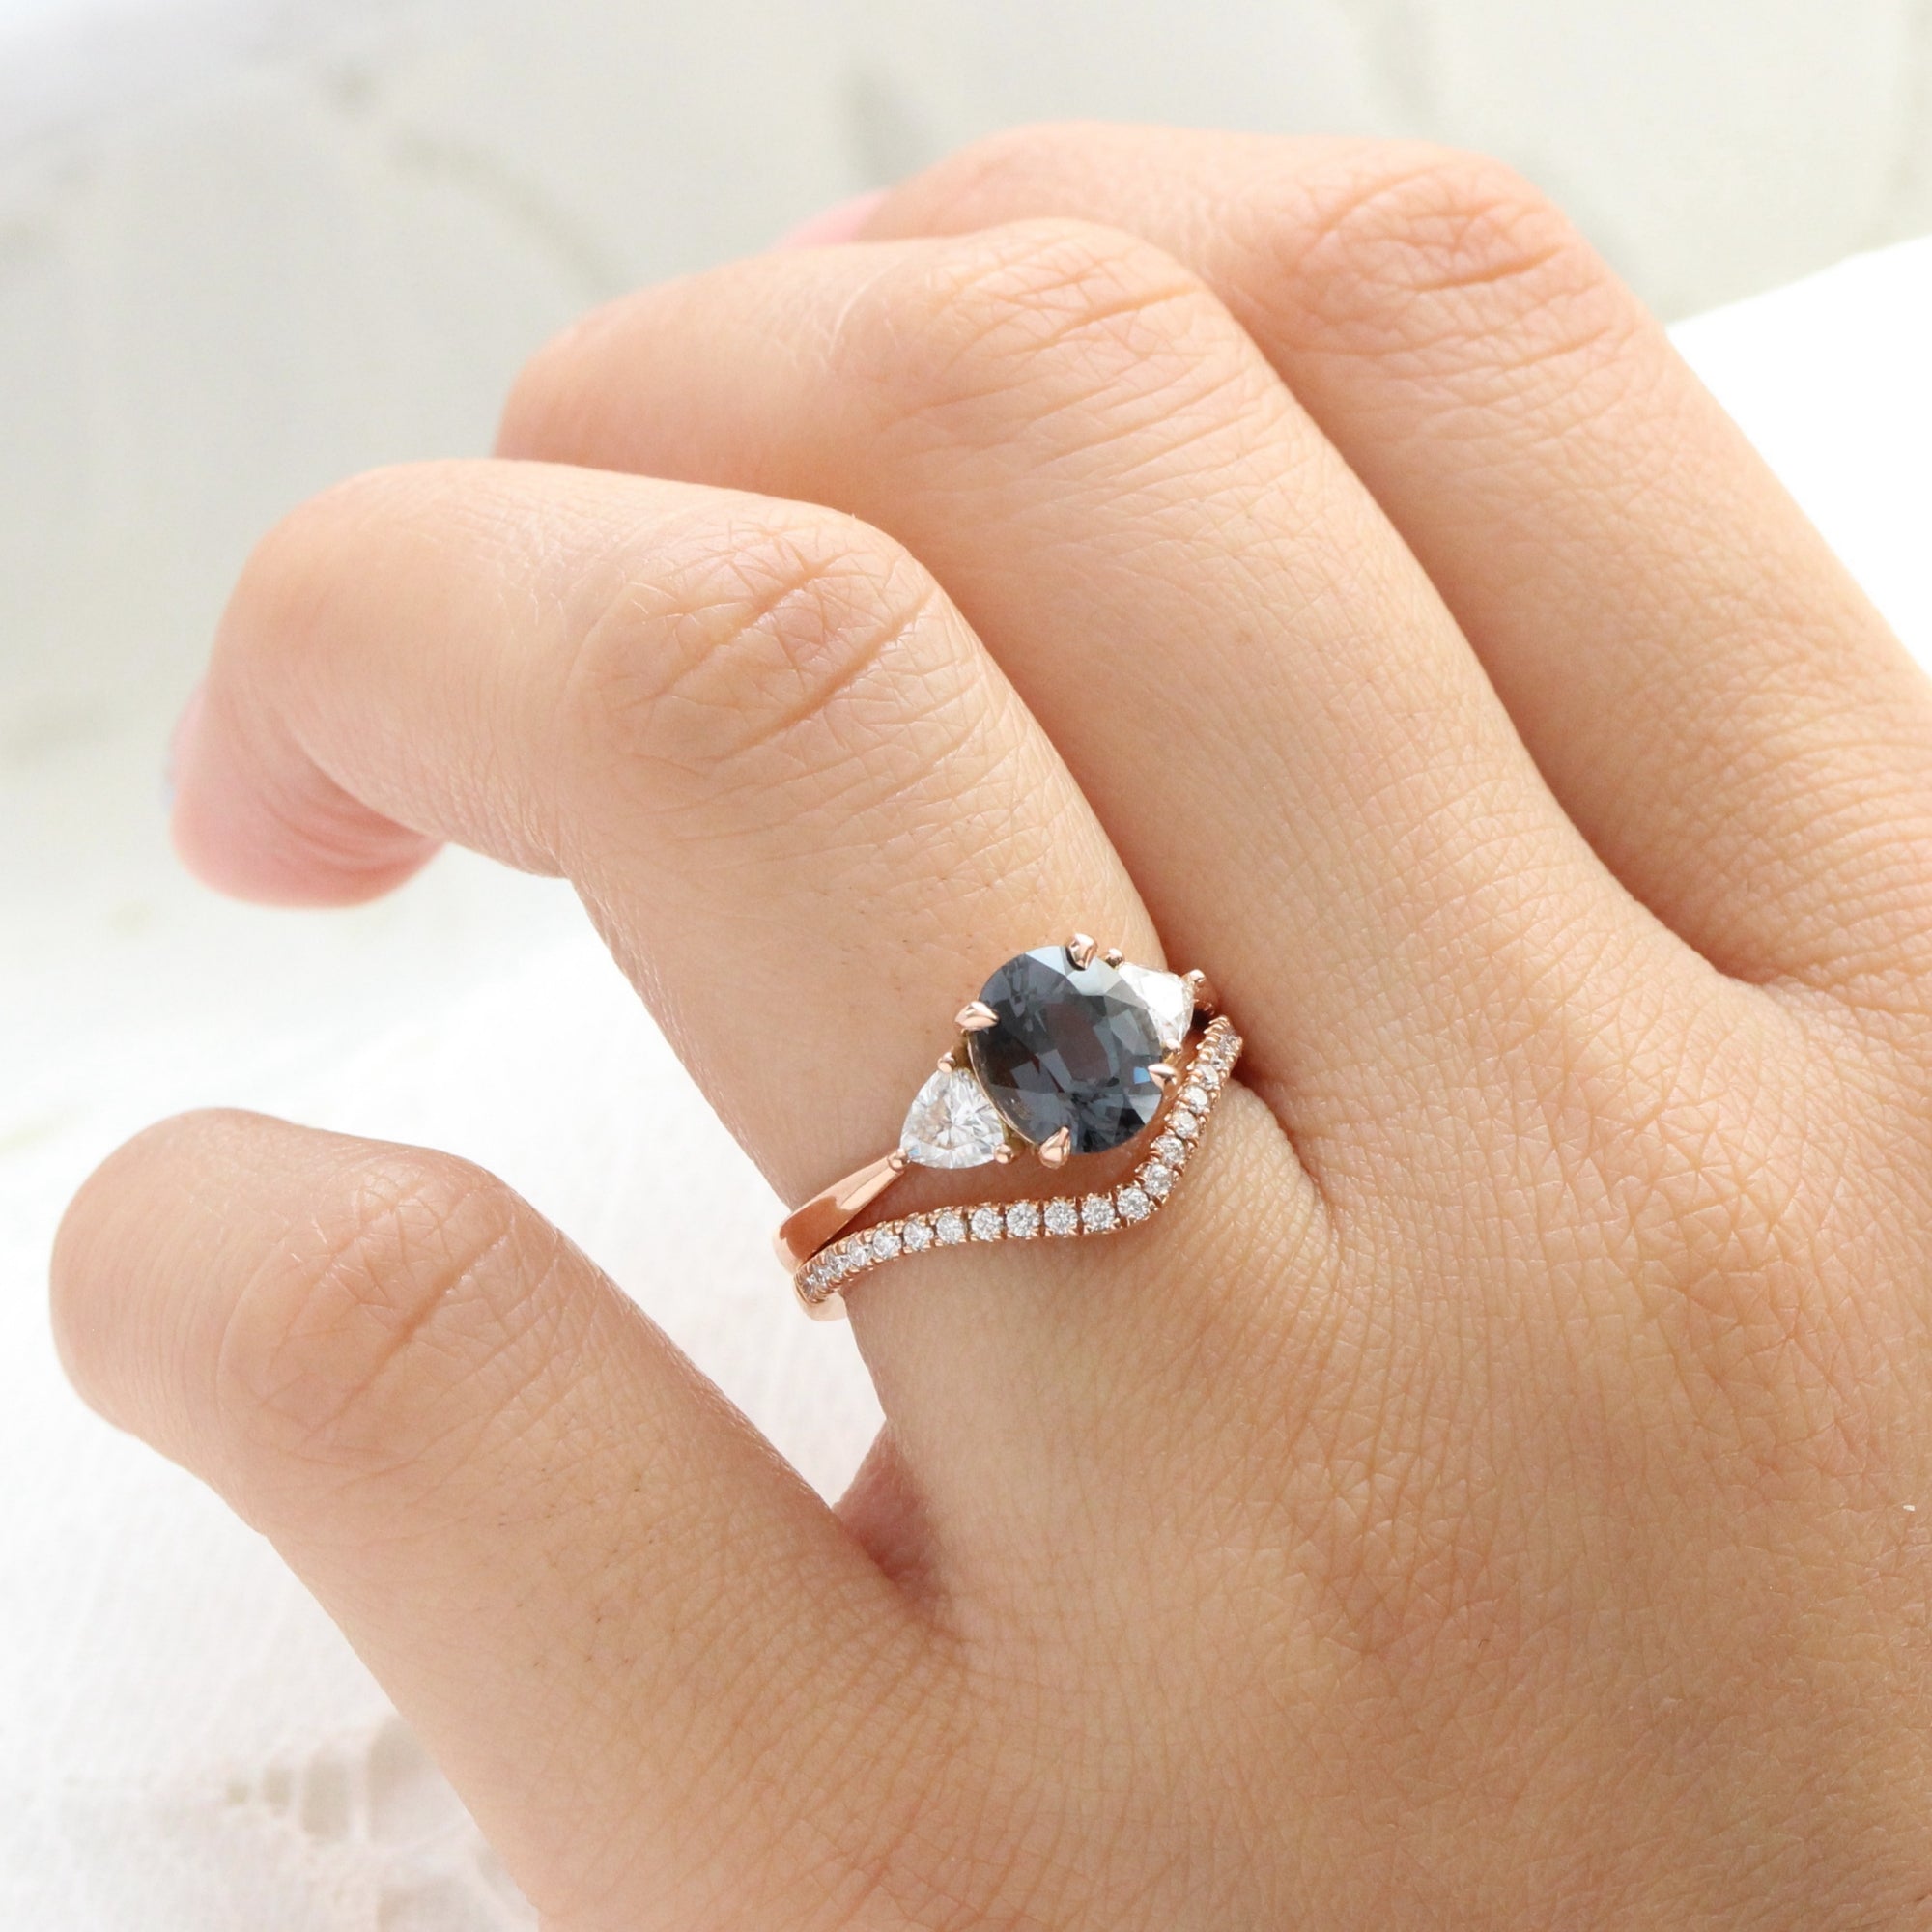 Oval grey spinel diamond ring rose gold 3 stone engagement ring la more design jewelry